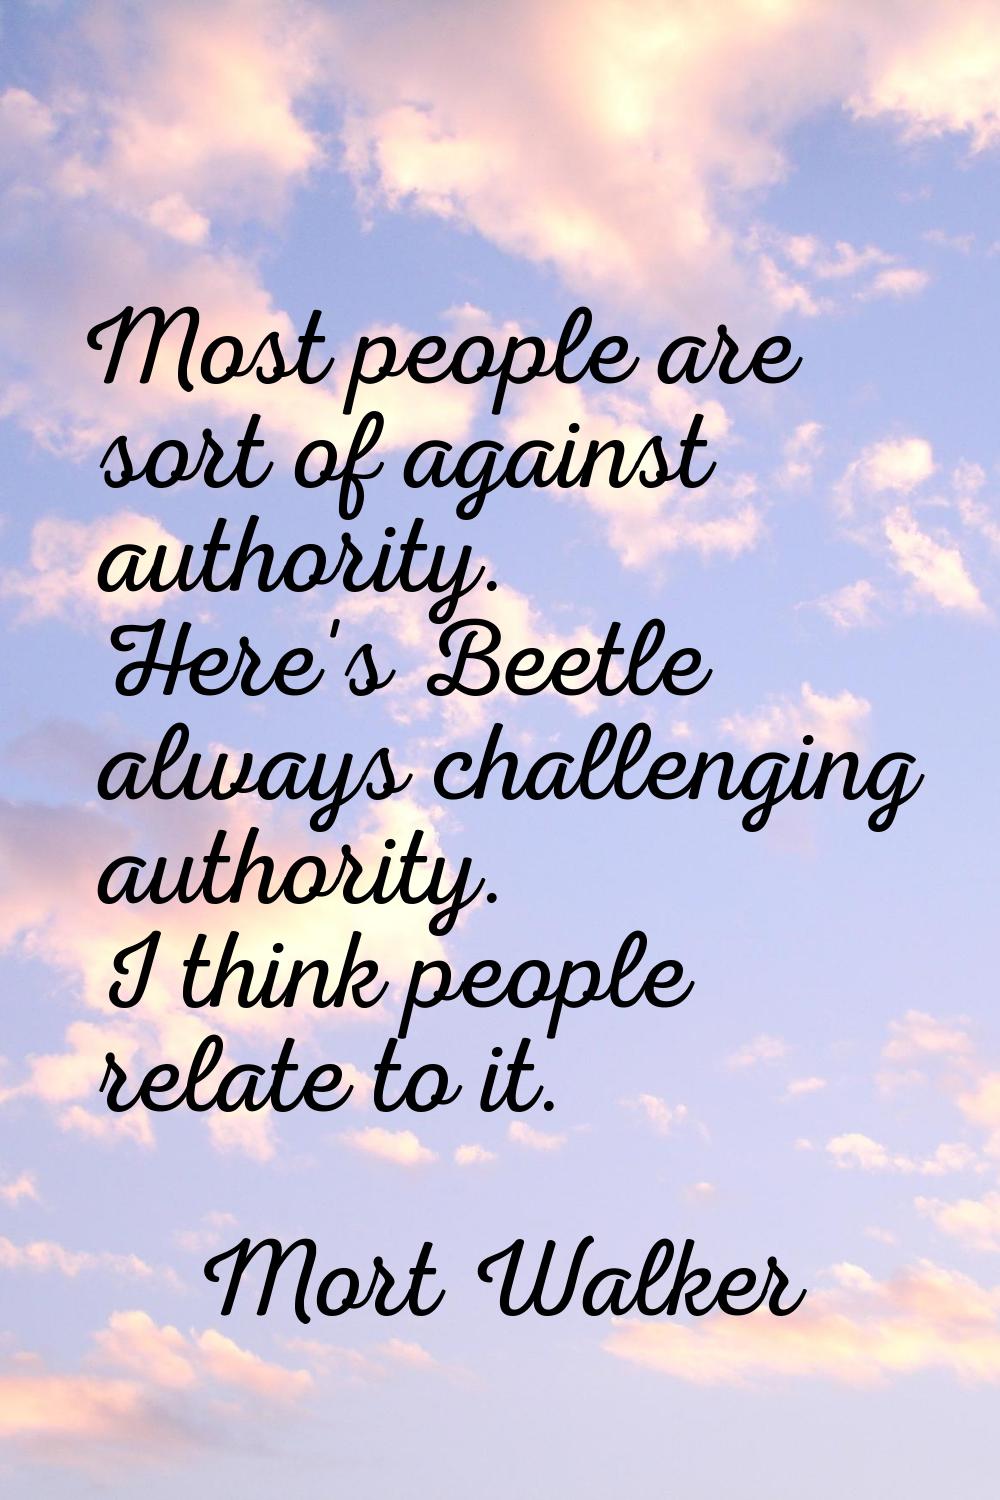 Most people are sort of against authority. Here's Beetle always challenging authority. I think peop